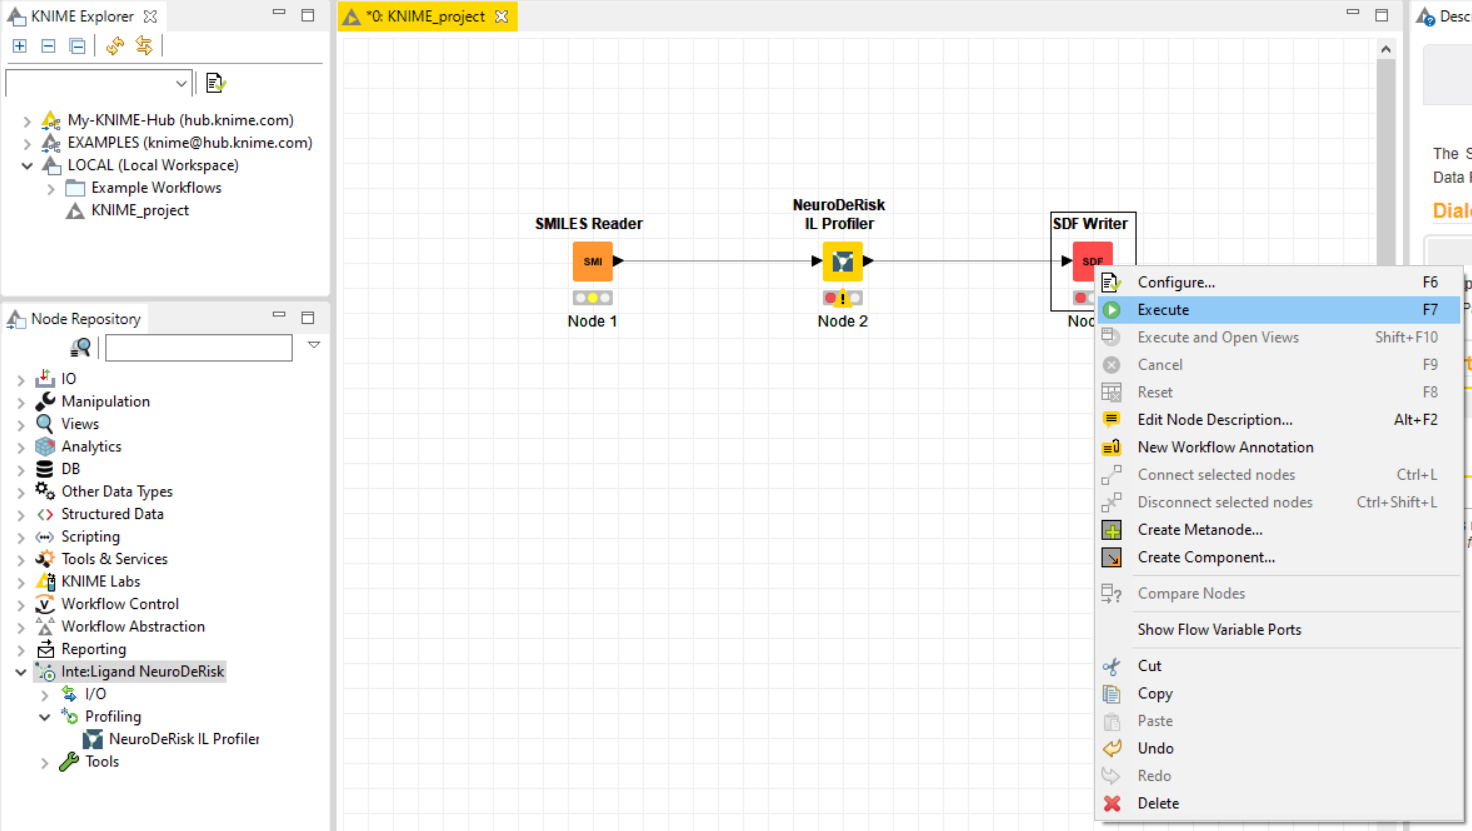 Connecting KNIME